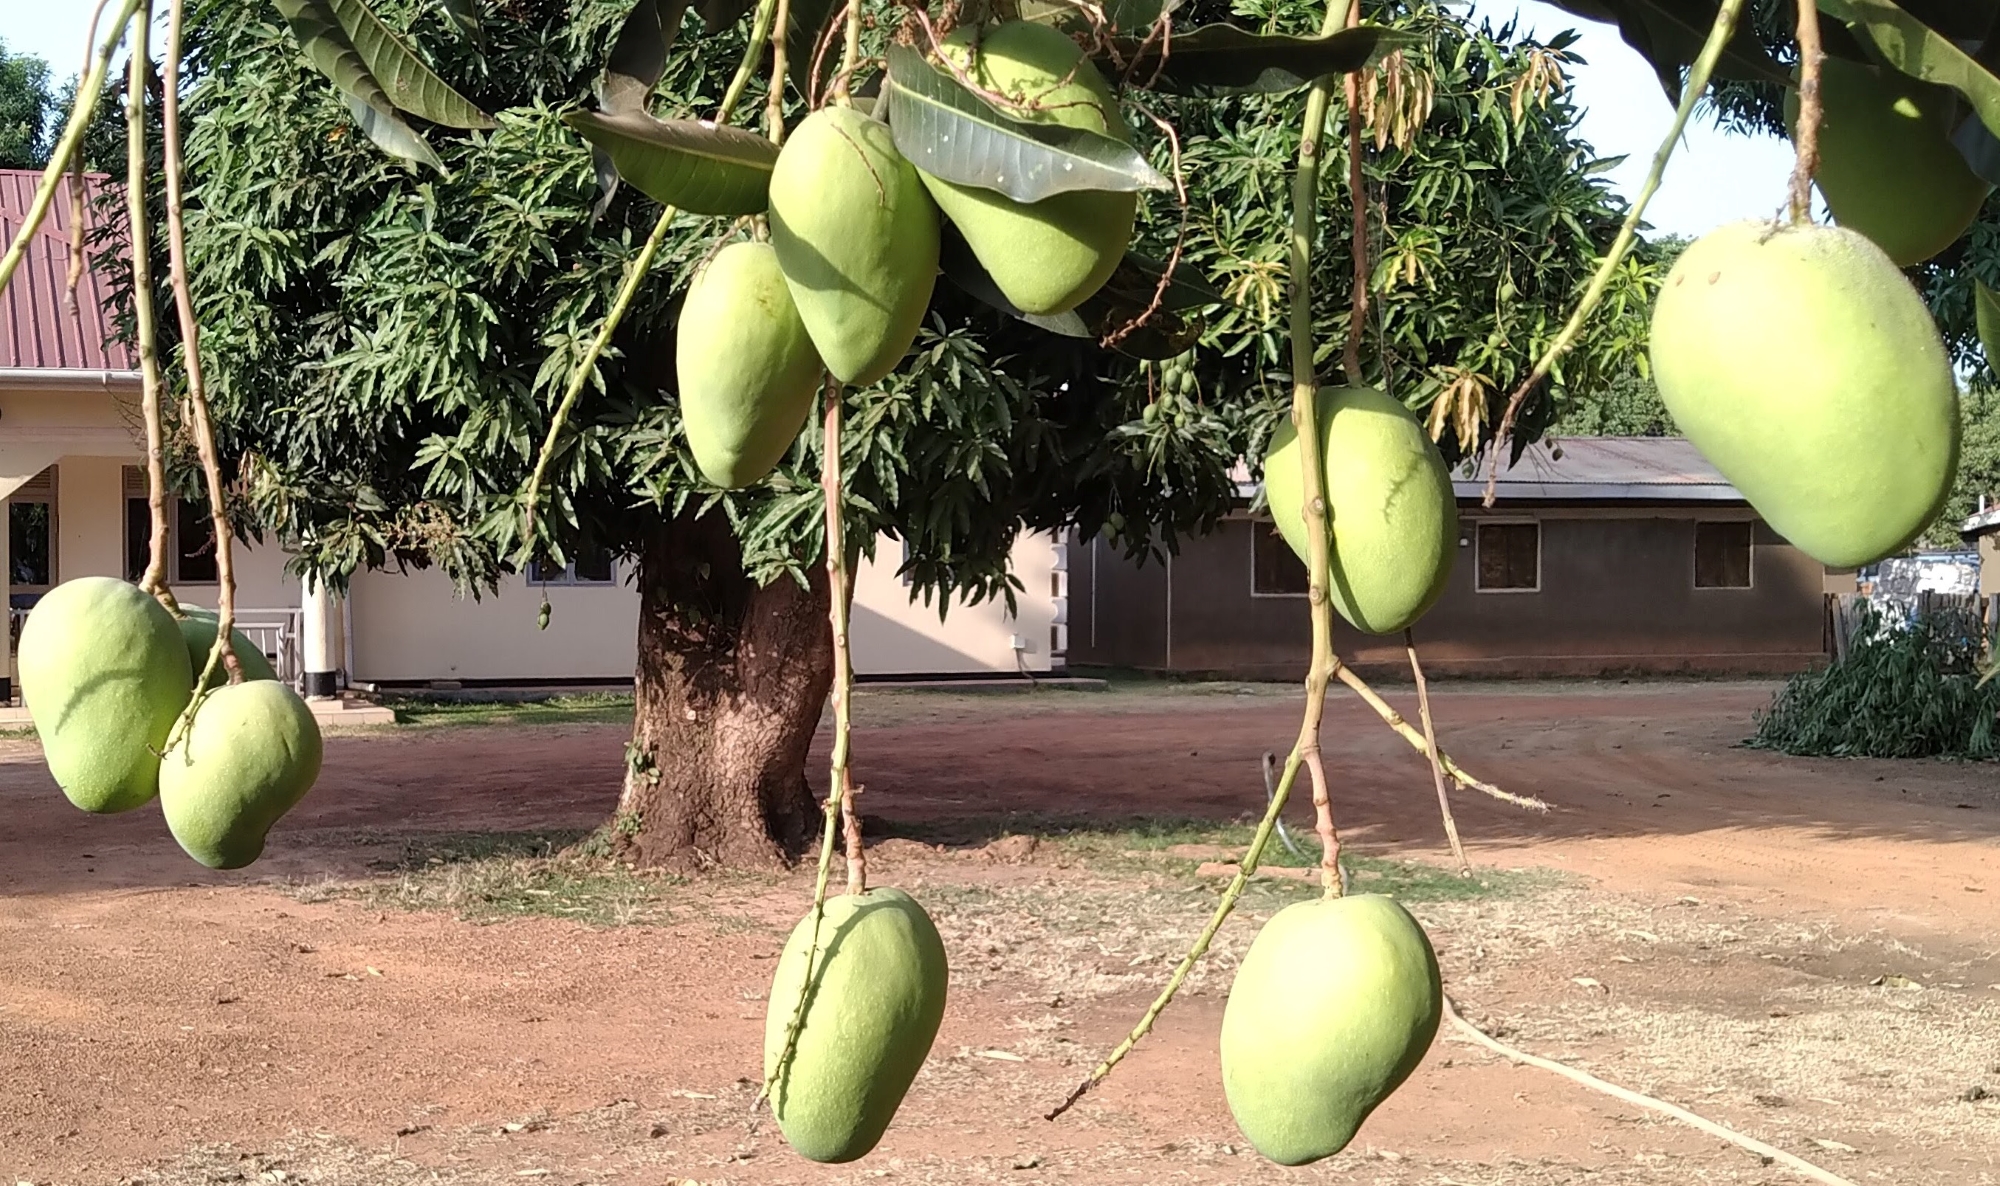 Mangoes hanging from a tree